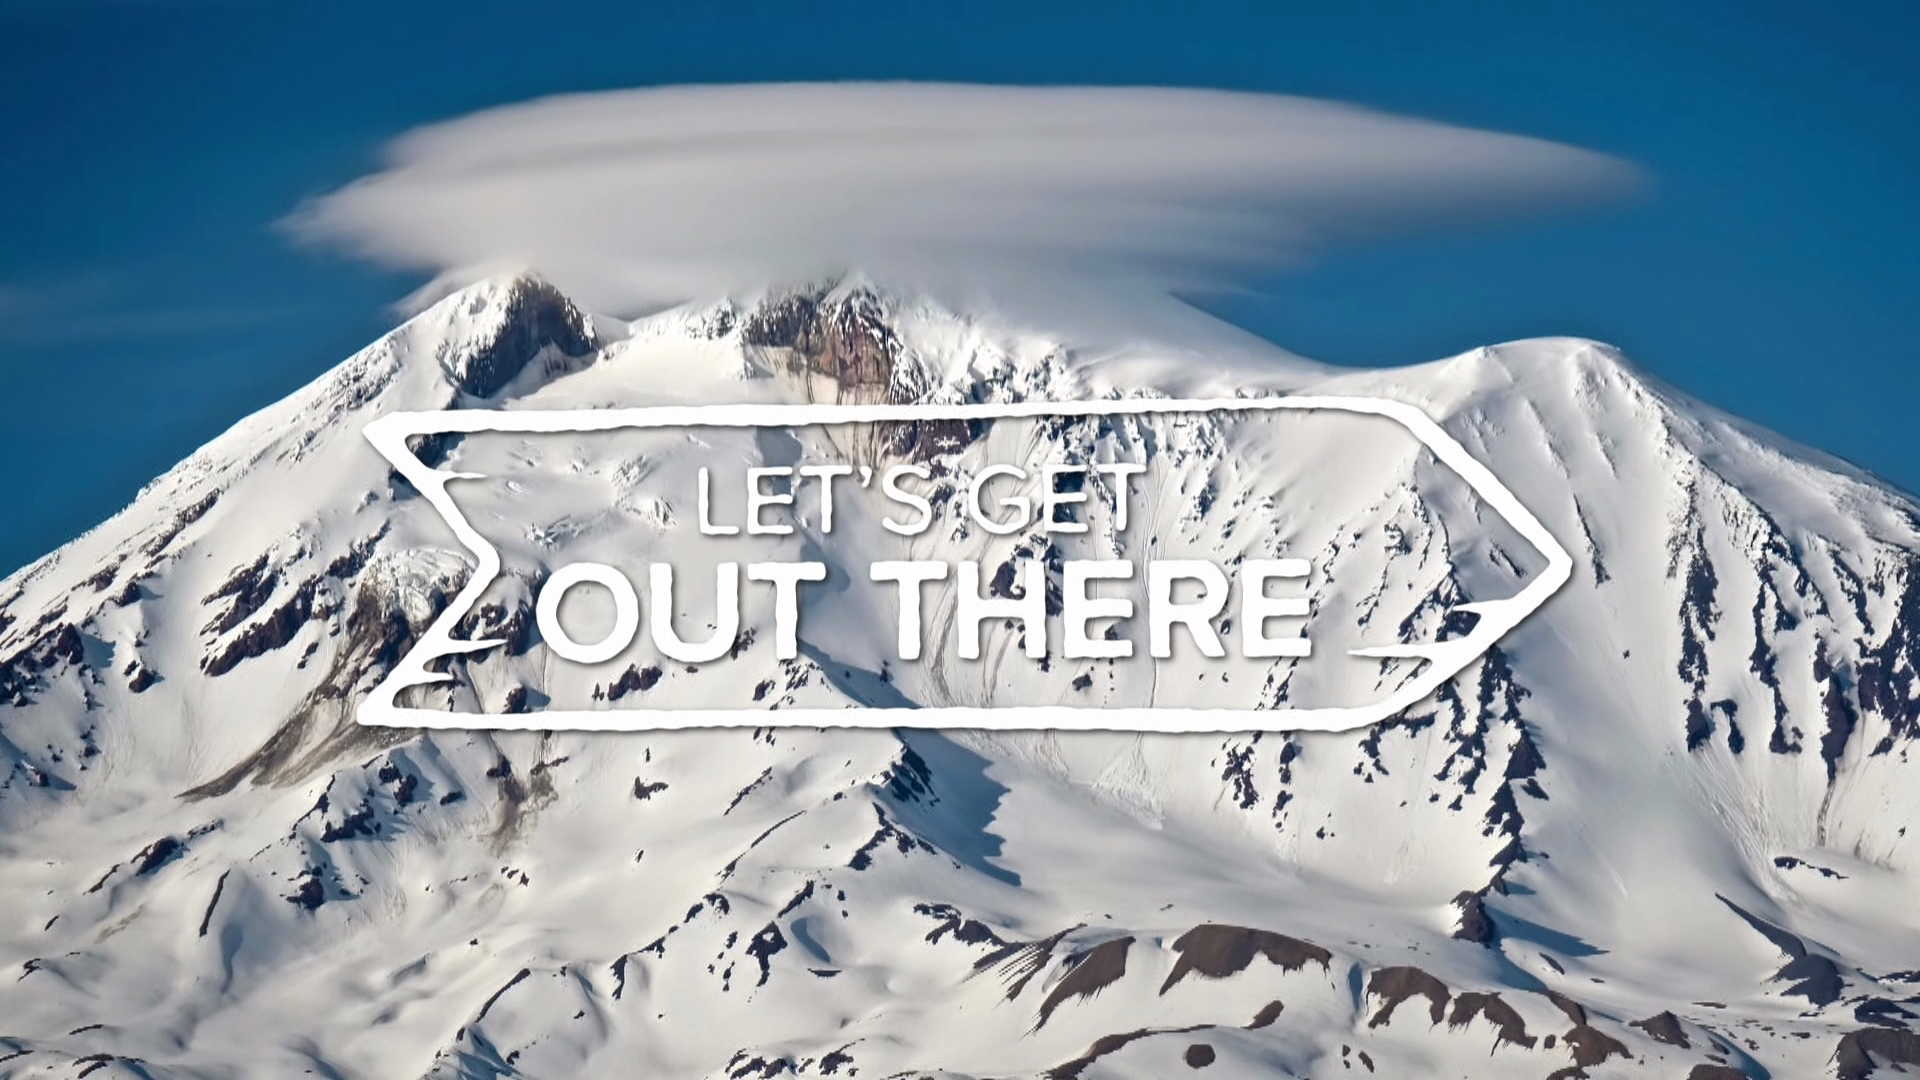 Climbing Oregon's Mount Hood, Washington's Mount St. Helens and Mount Adams. A Let's Get Out There adventure challenge.